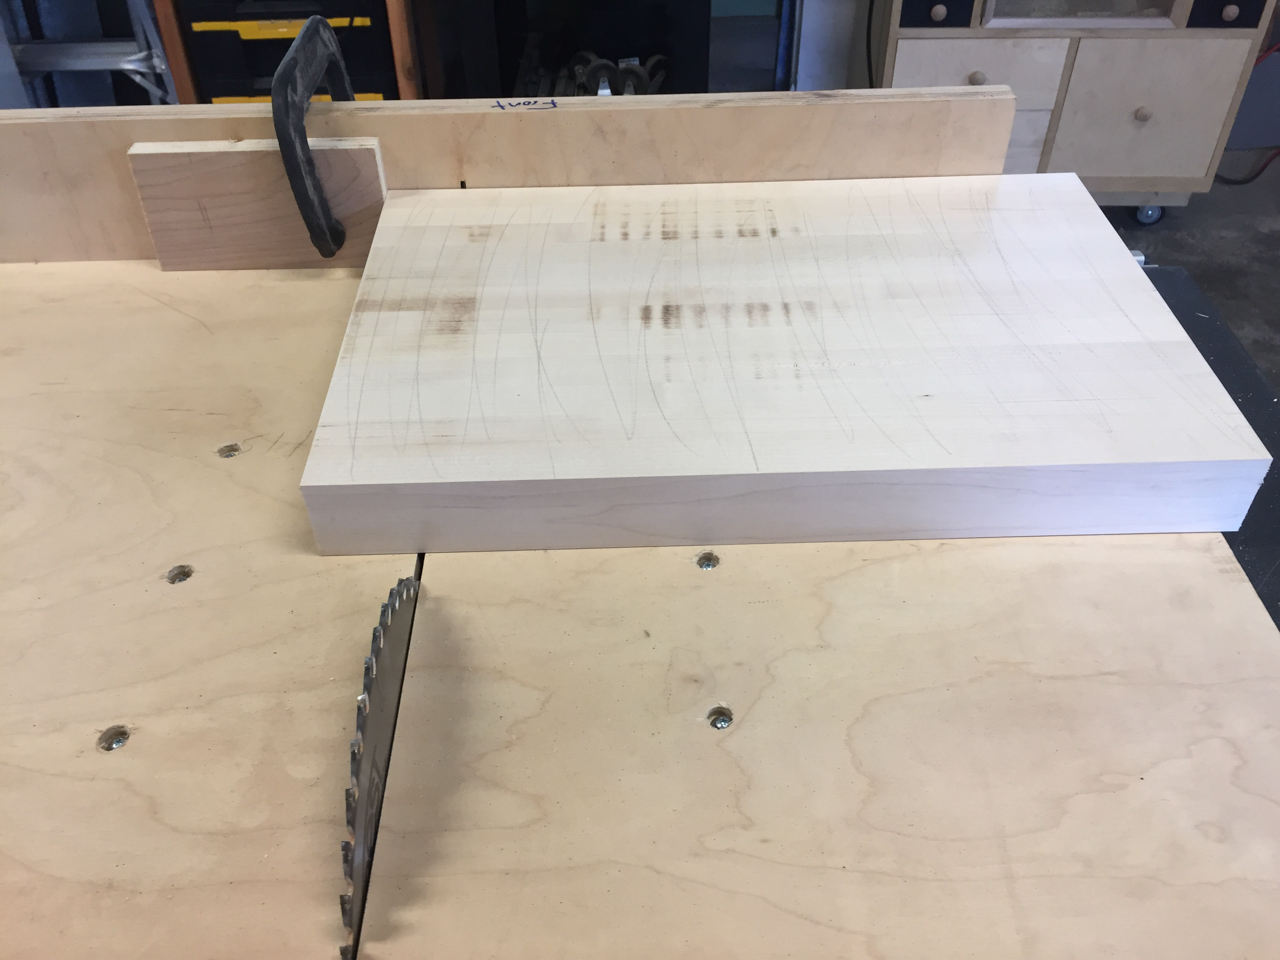 Cutting Board Build - Back into Strips